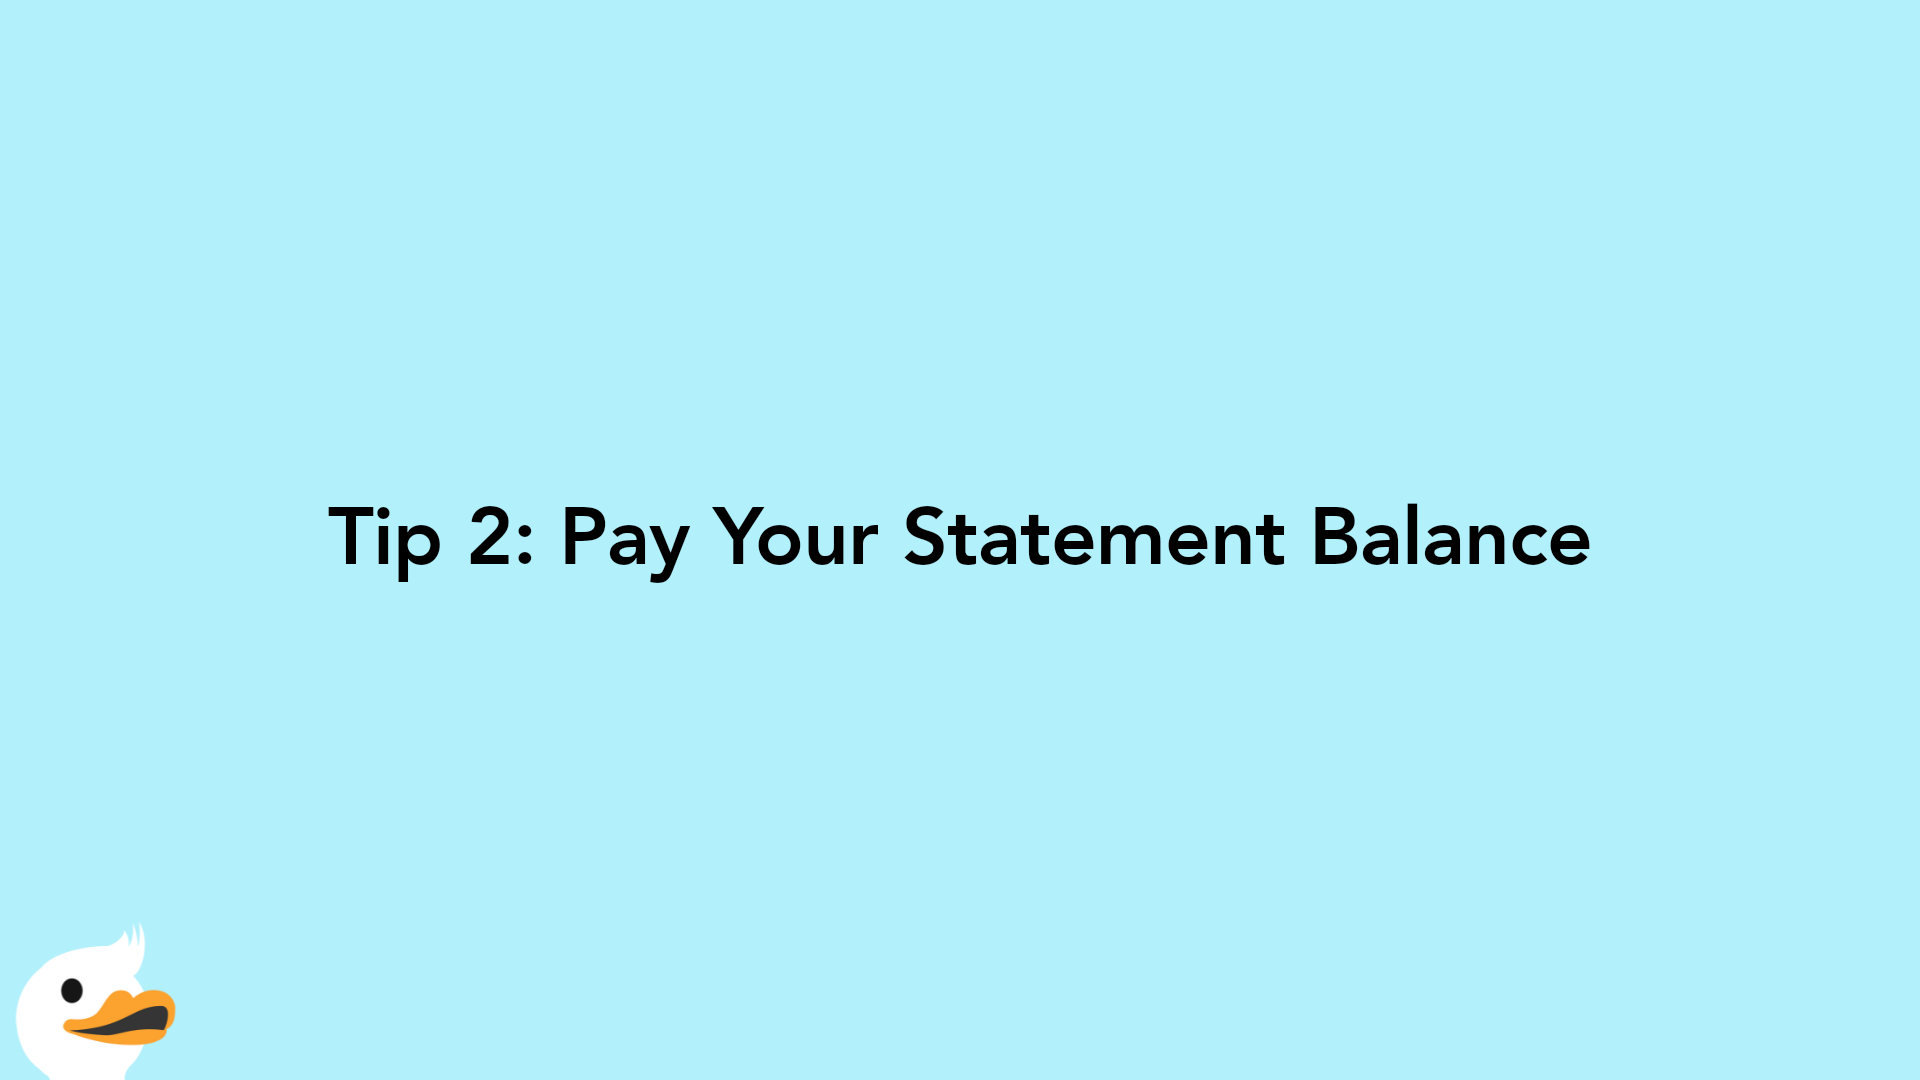 Tip 2: Pay Your Statement Balance